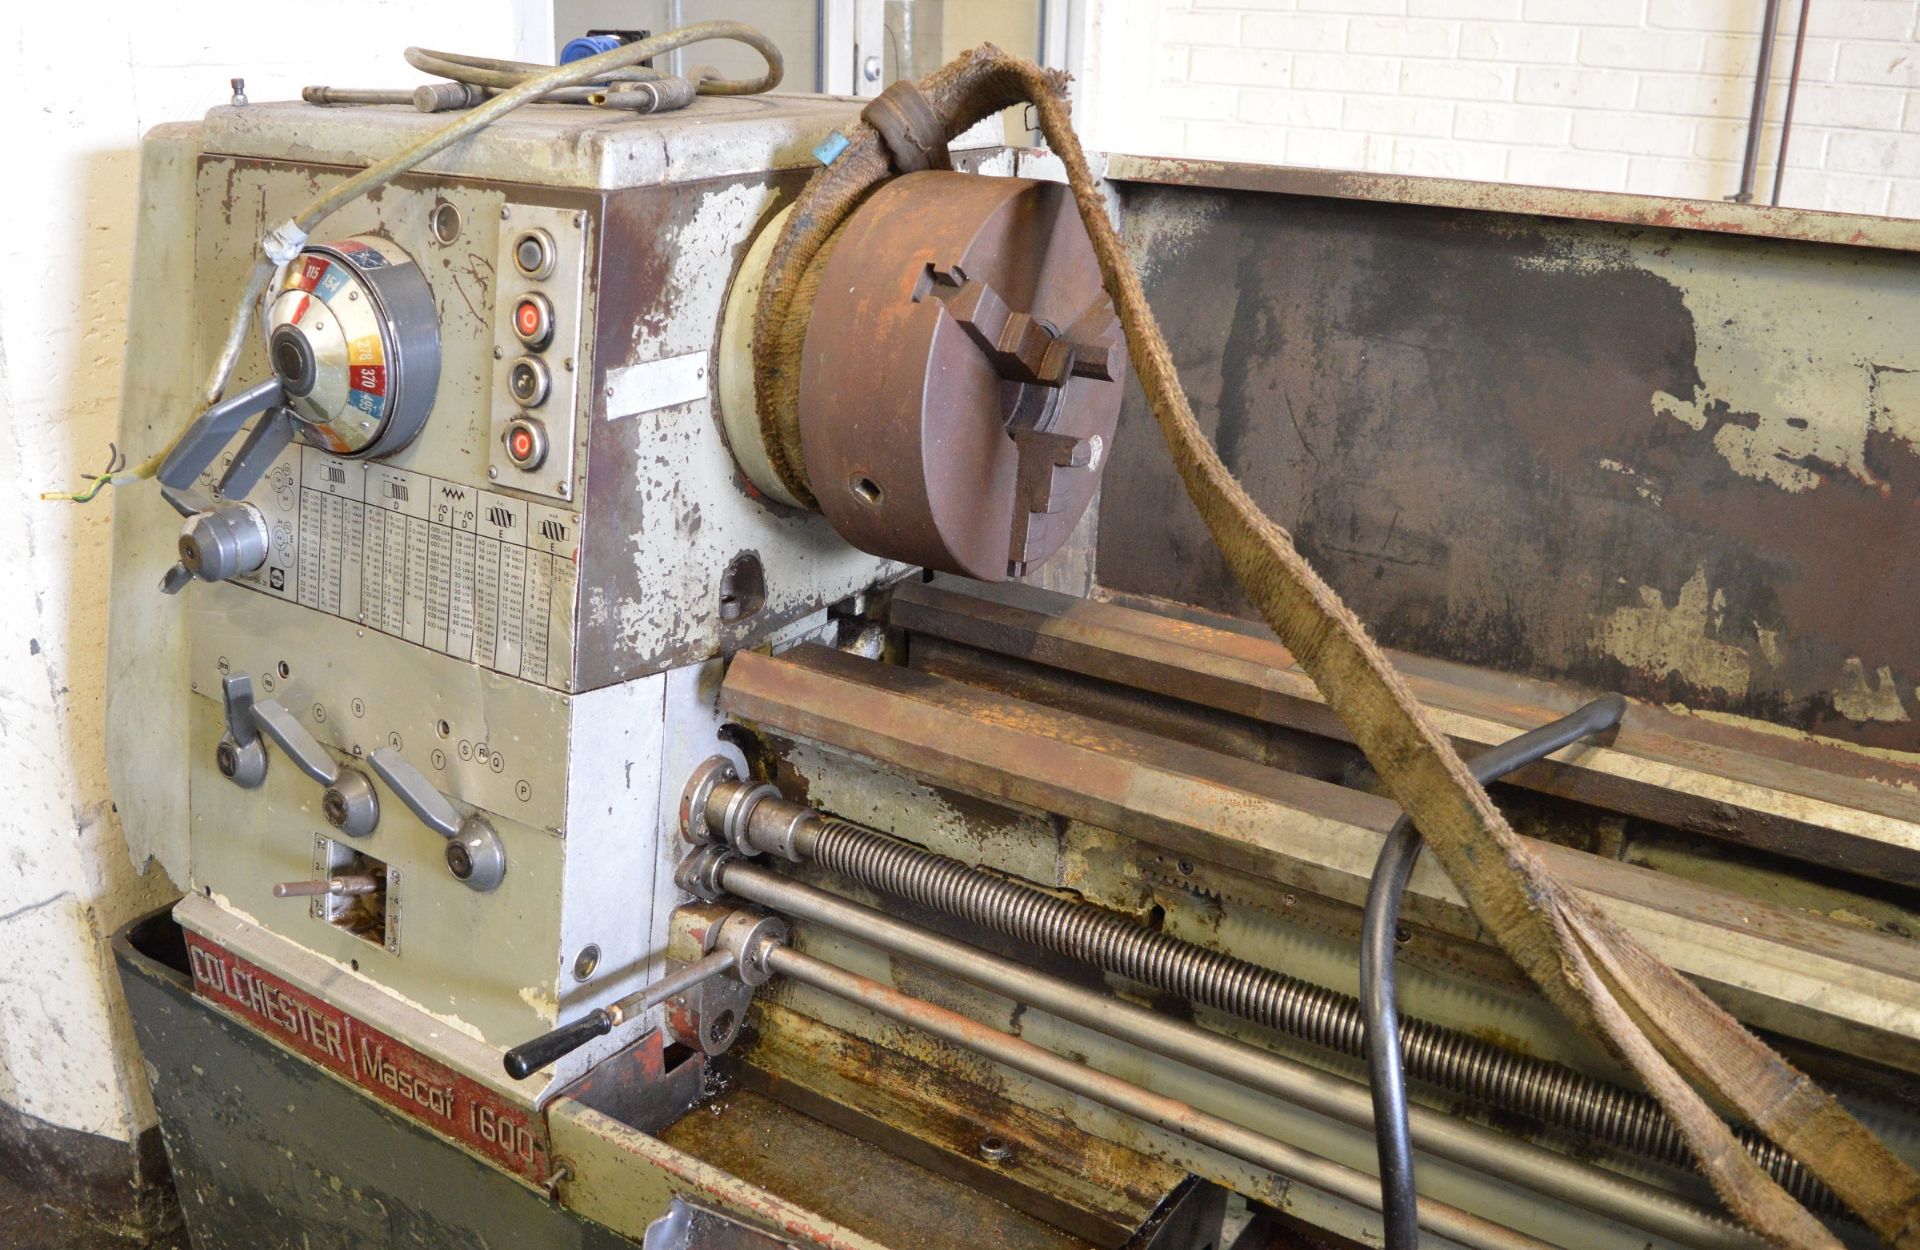 Colchester Mascot 1600 Lathe - Serial Number 7/0006/07853 - Image 3 of 16